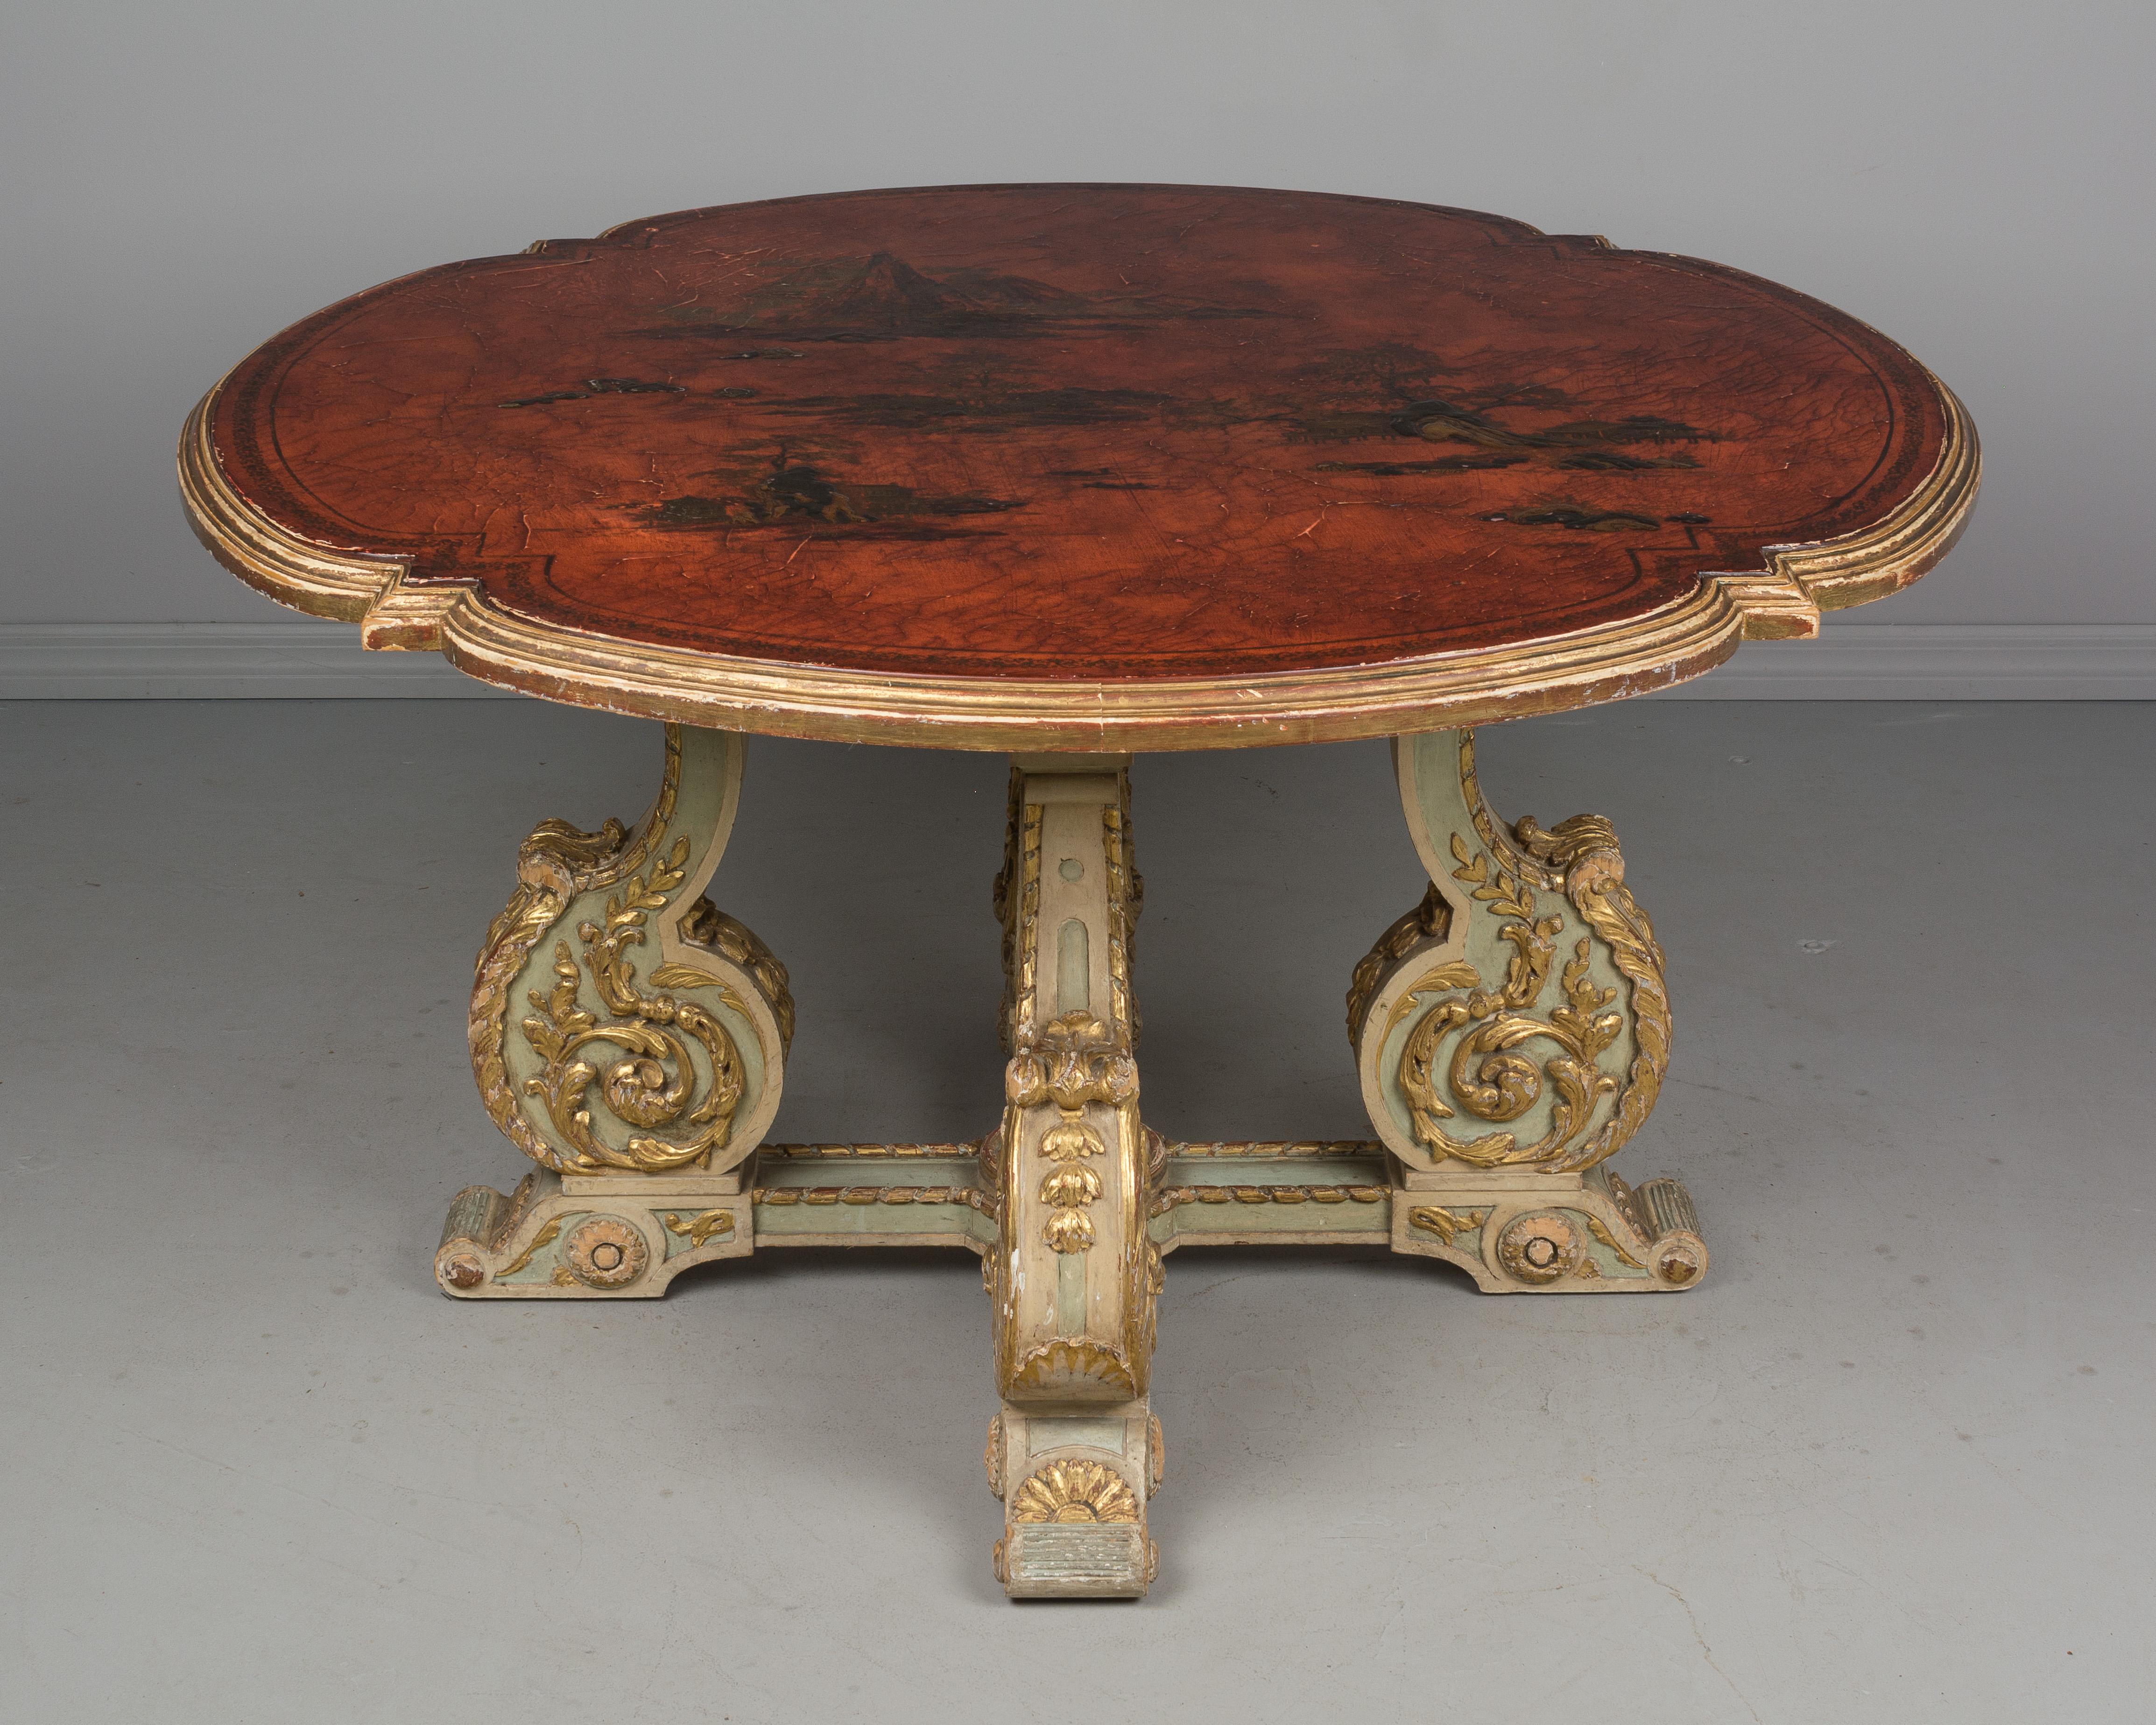 Midcentury French Chinoiserie Guéridon or Center Table 1